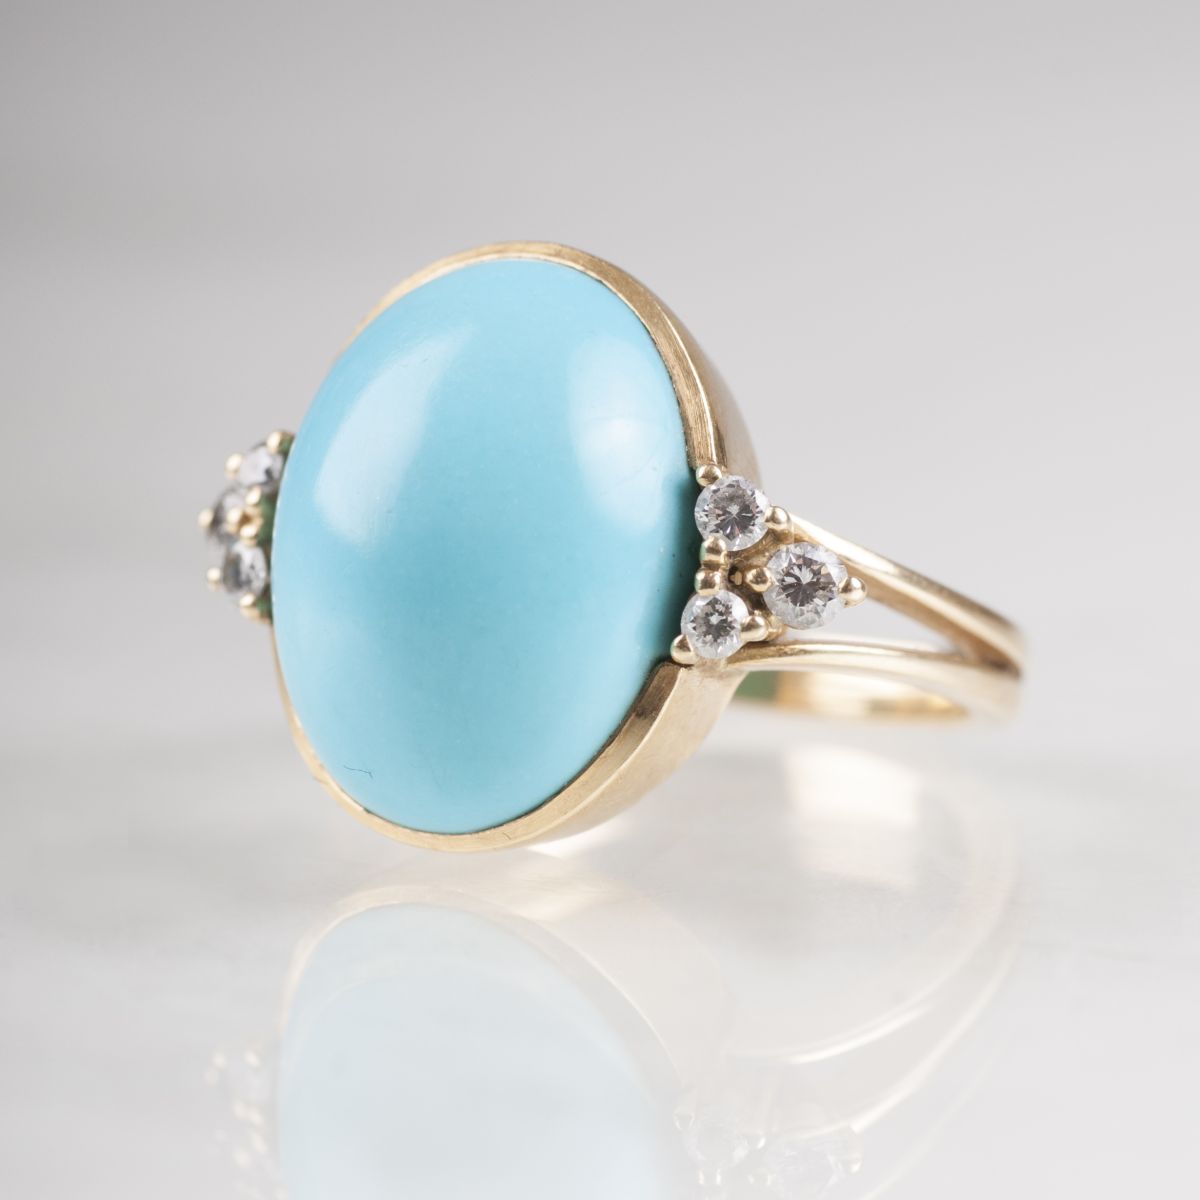 A turquoise diamond ring